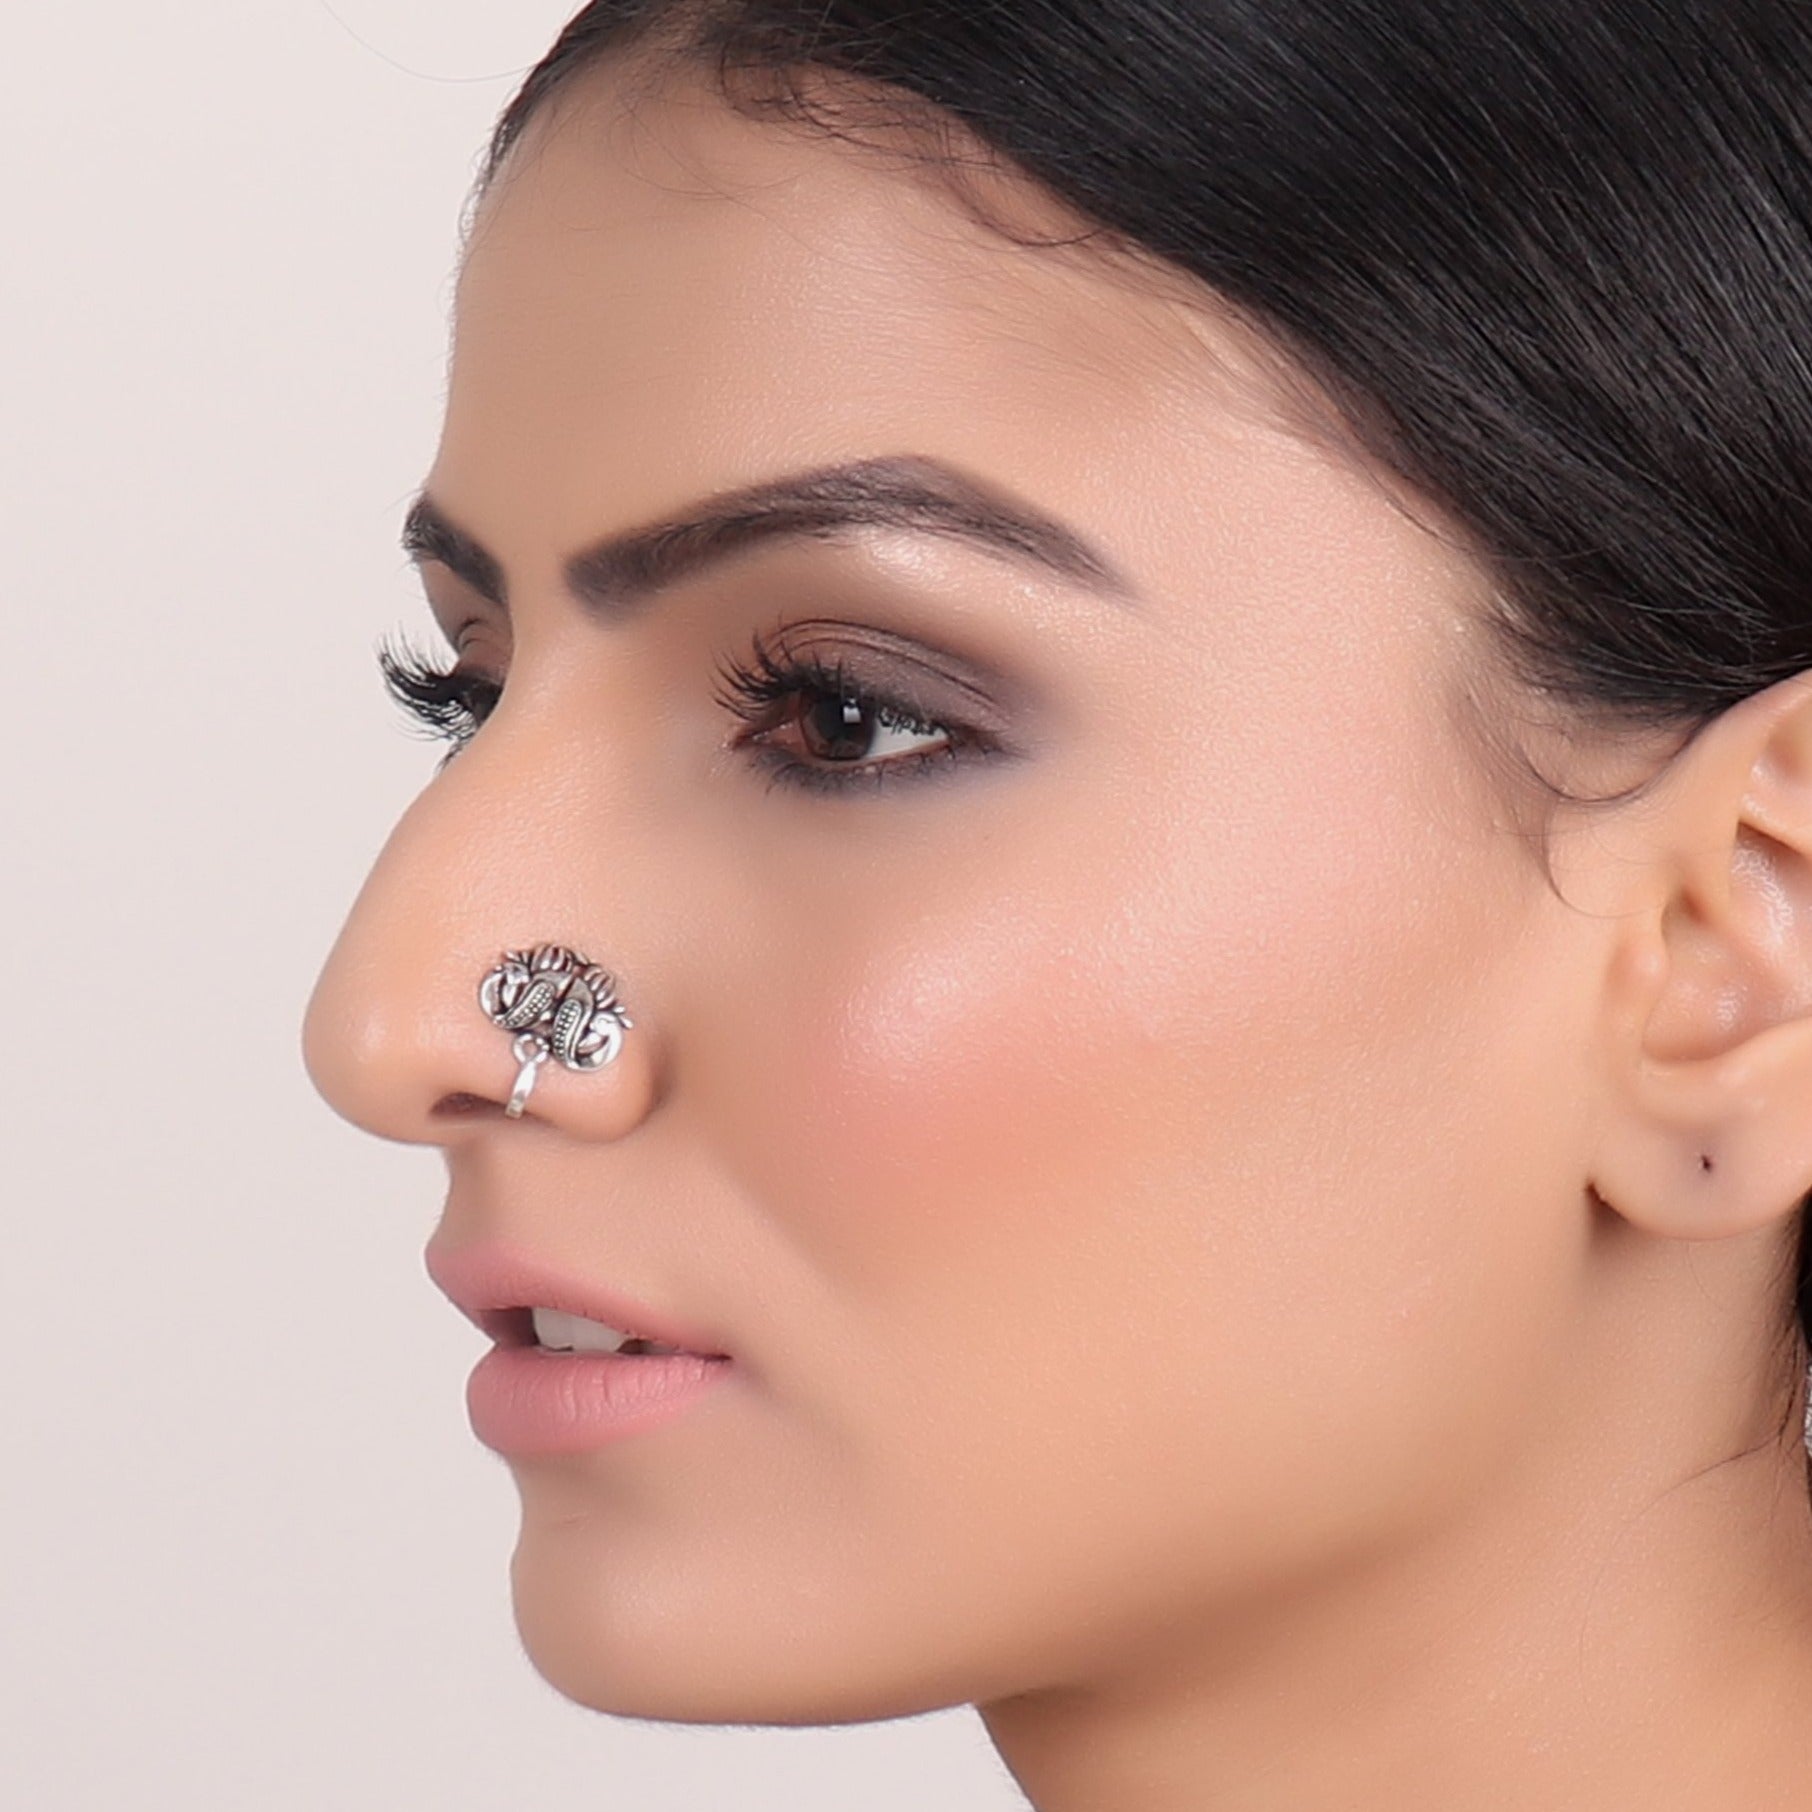 Nose Pin,Bold Appeal Nose Pin - Cippele Multi Store